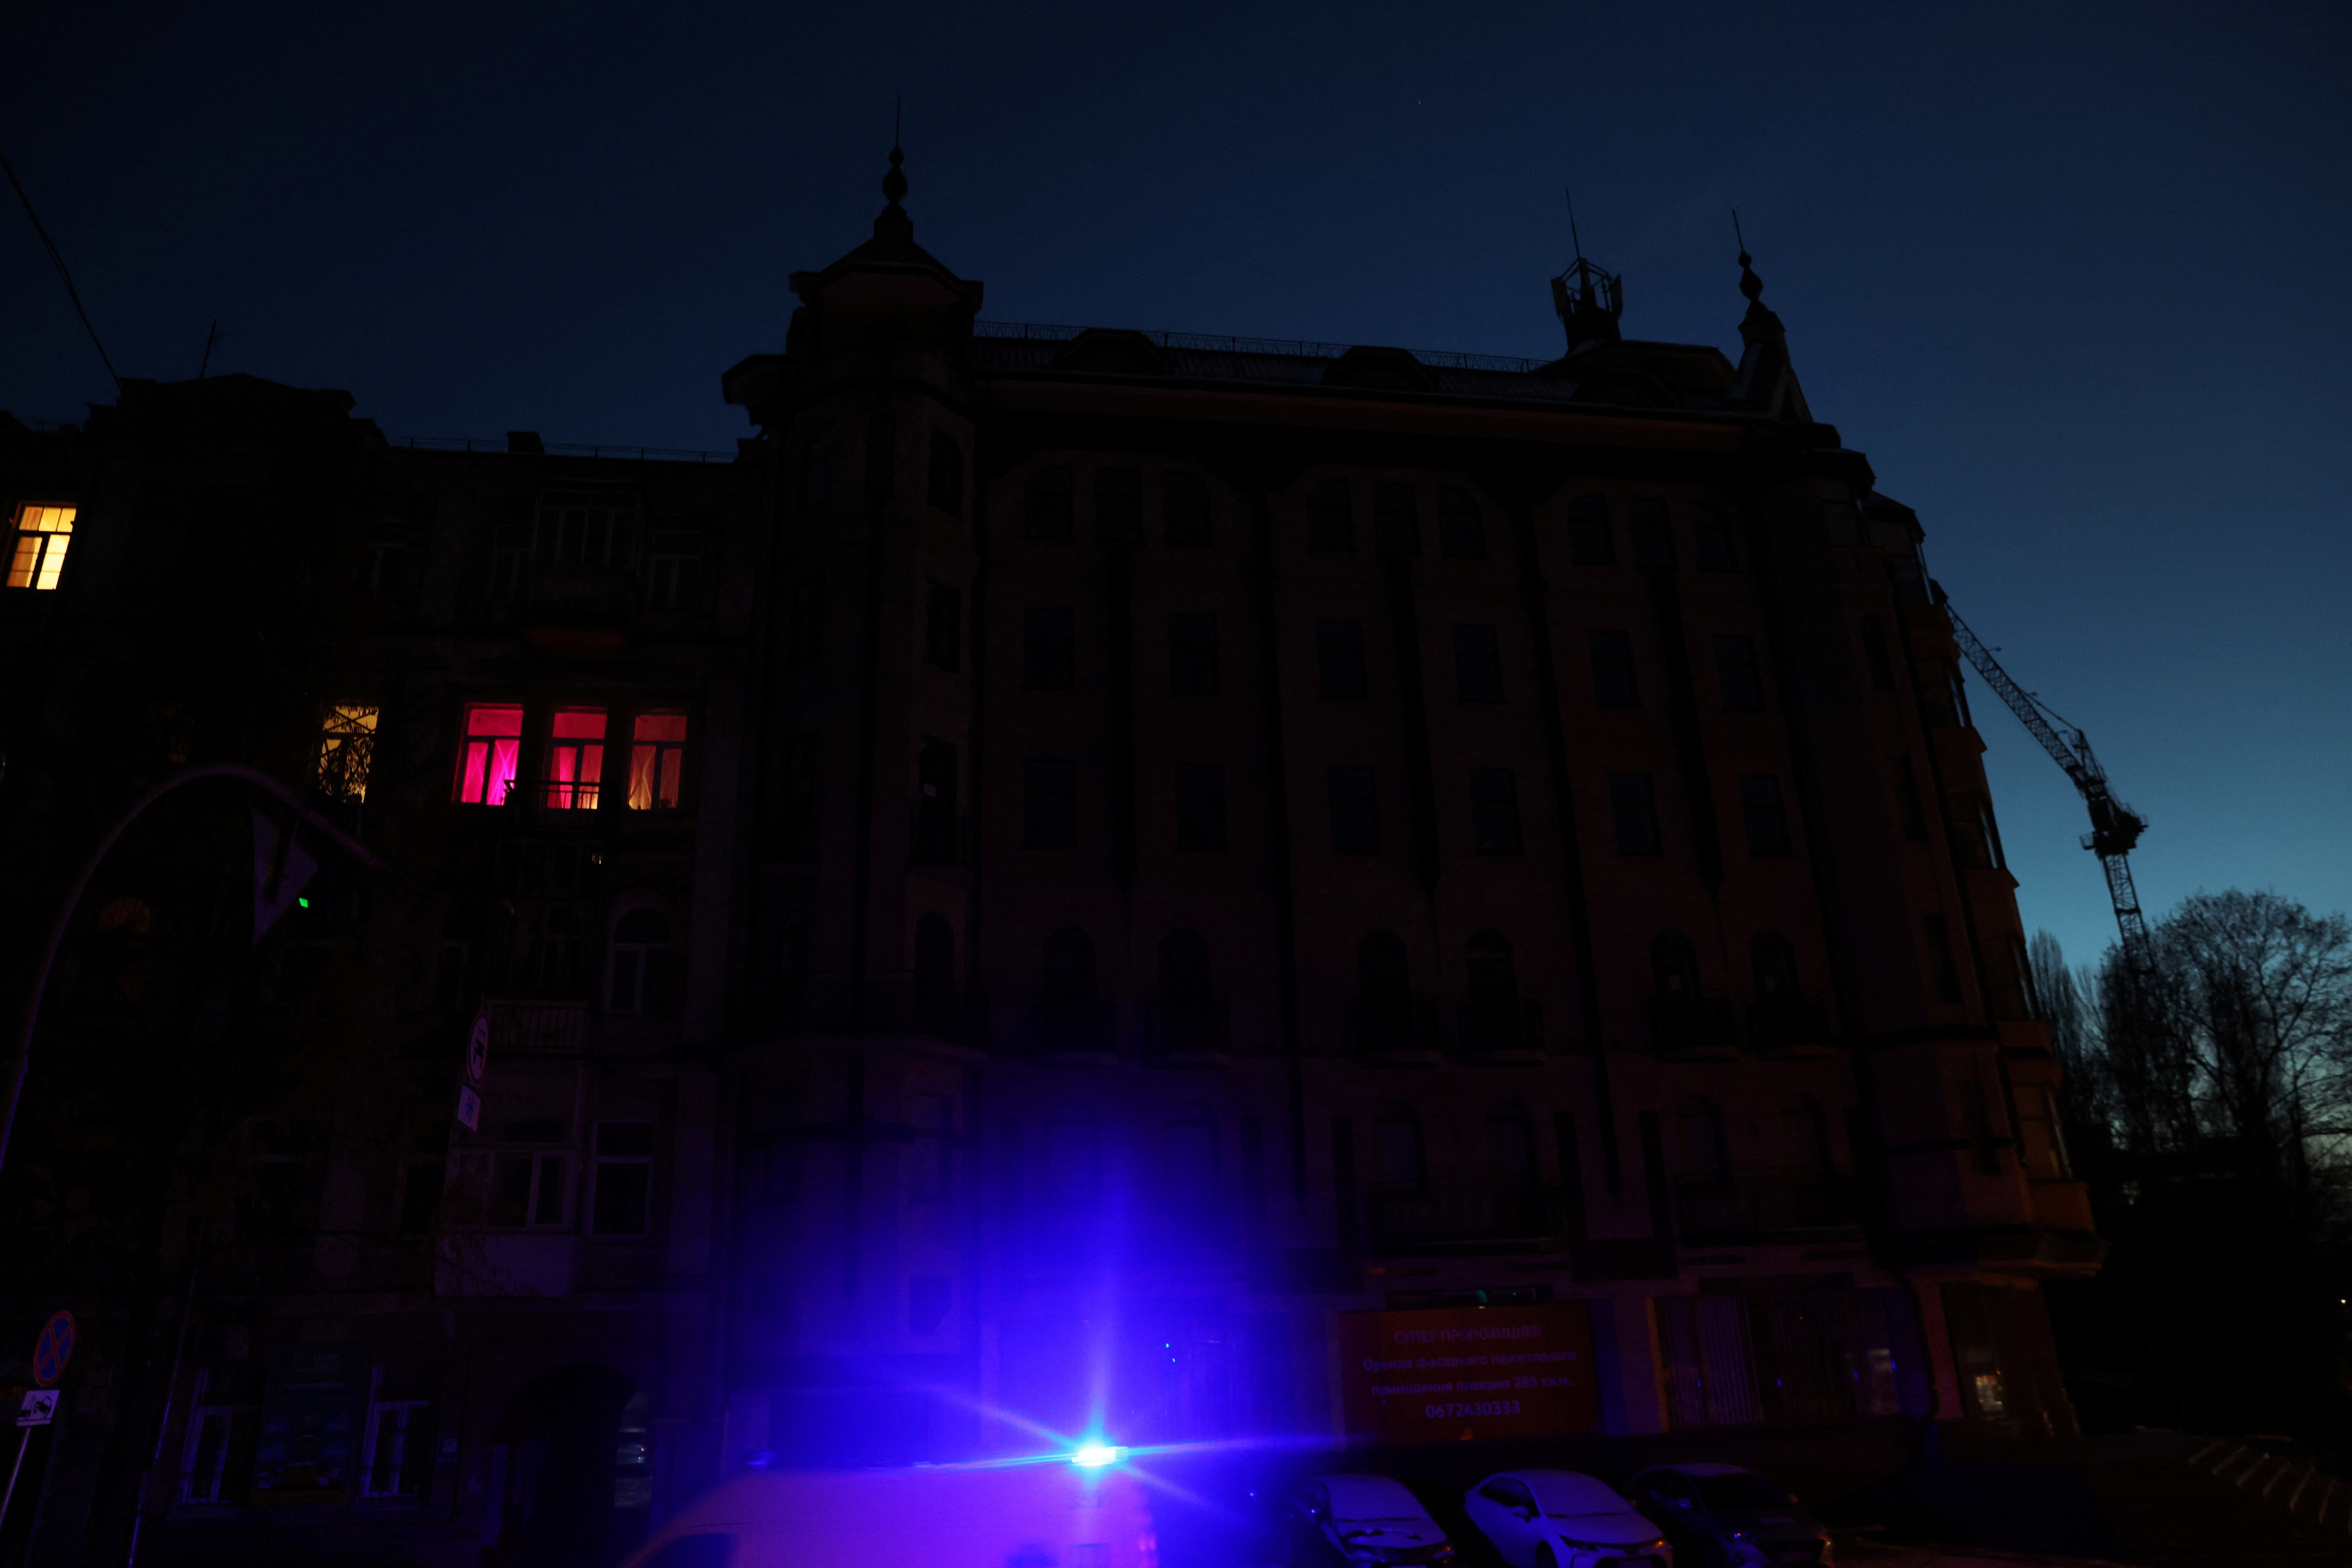 An ambulance drives by a building during power outages in Kyiv